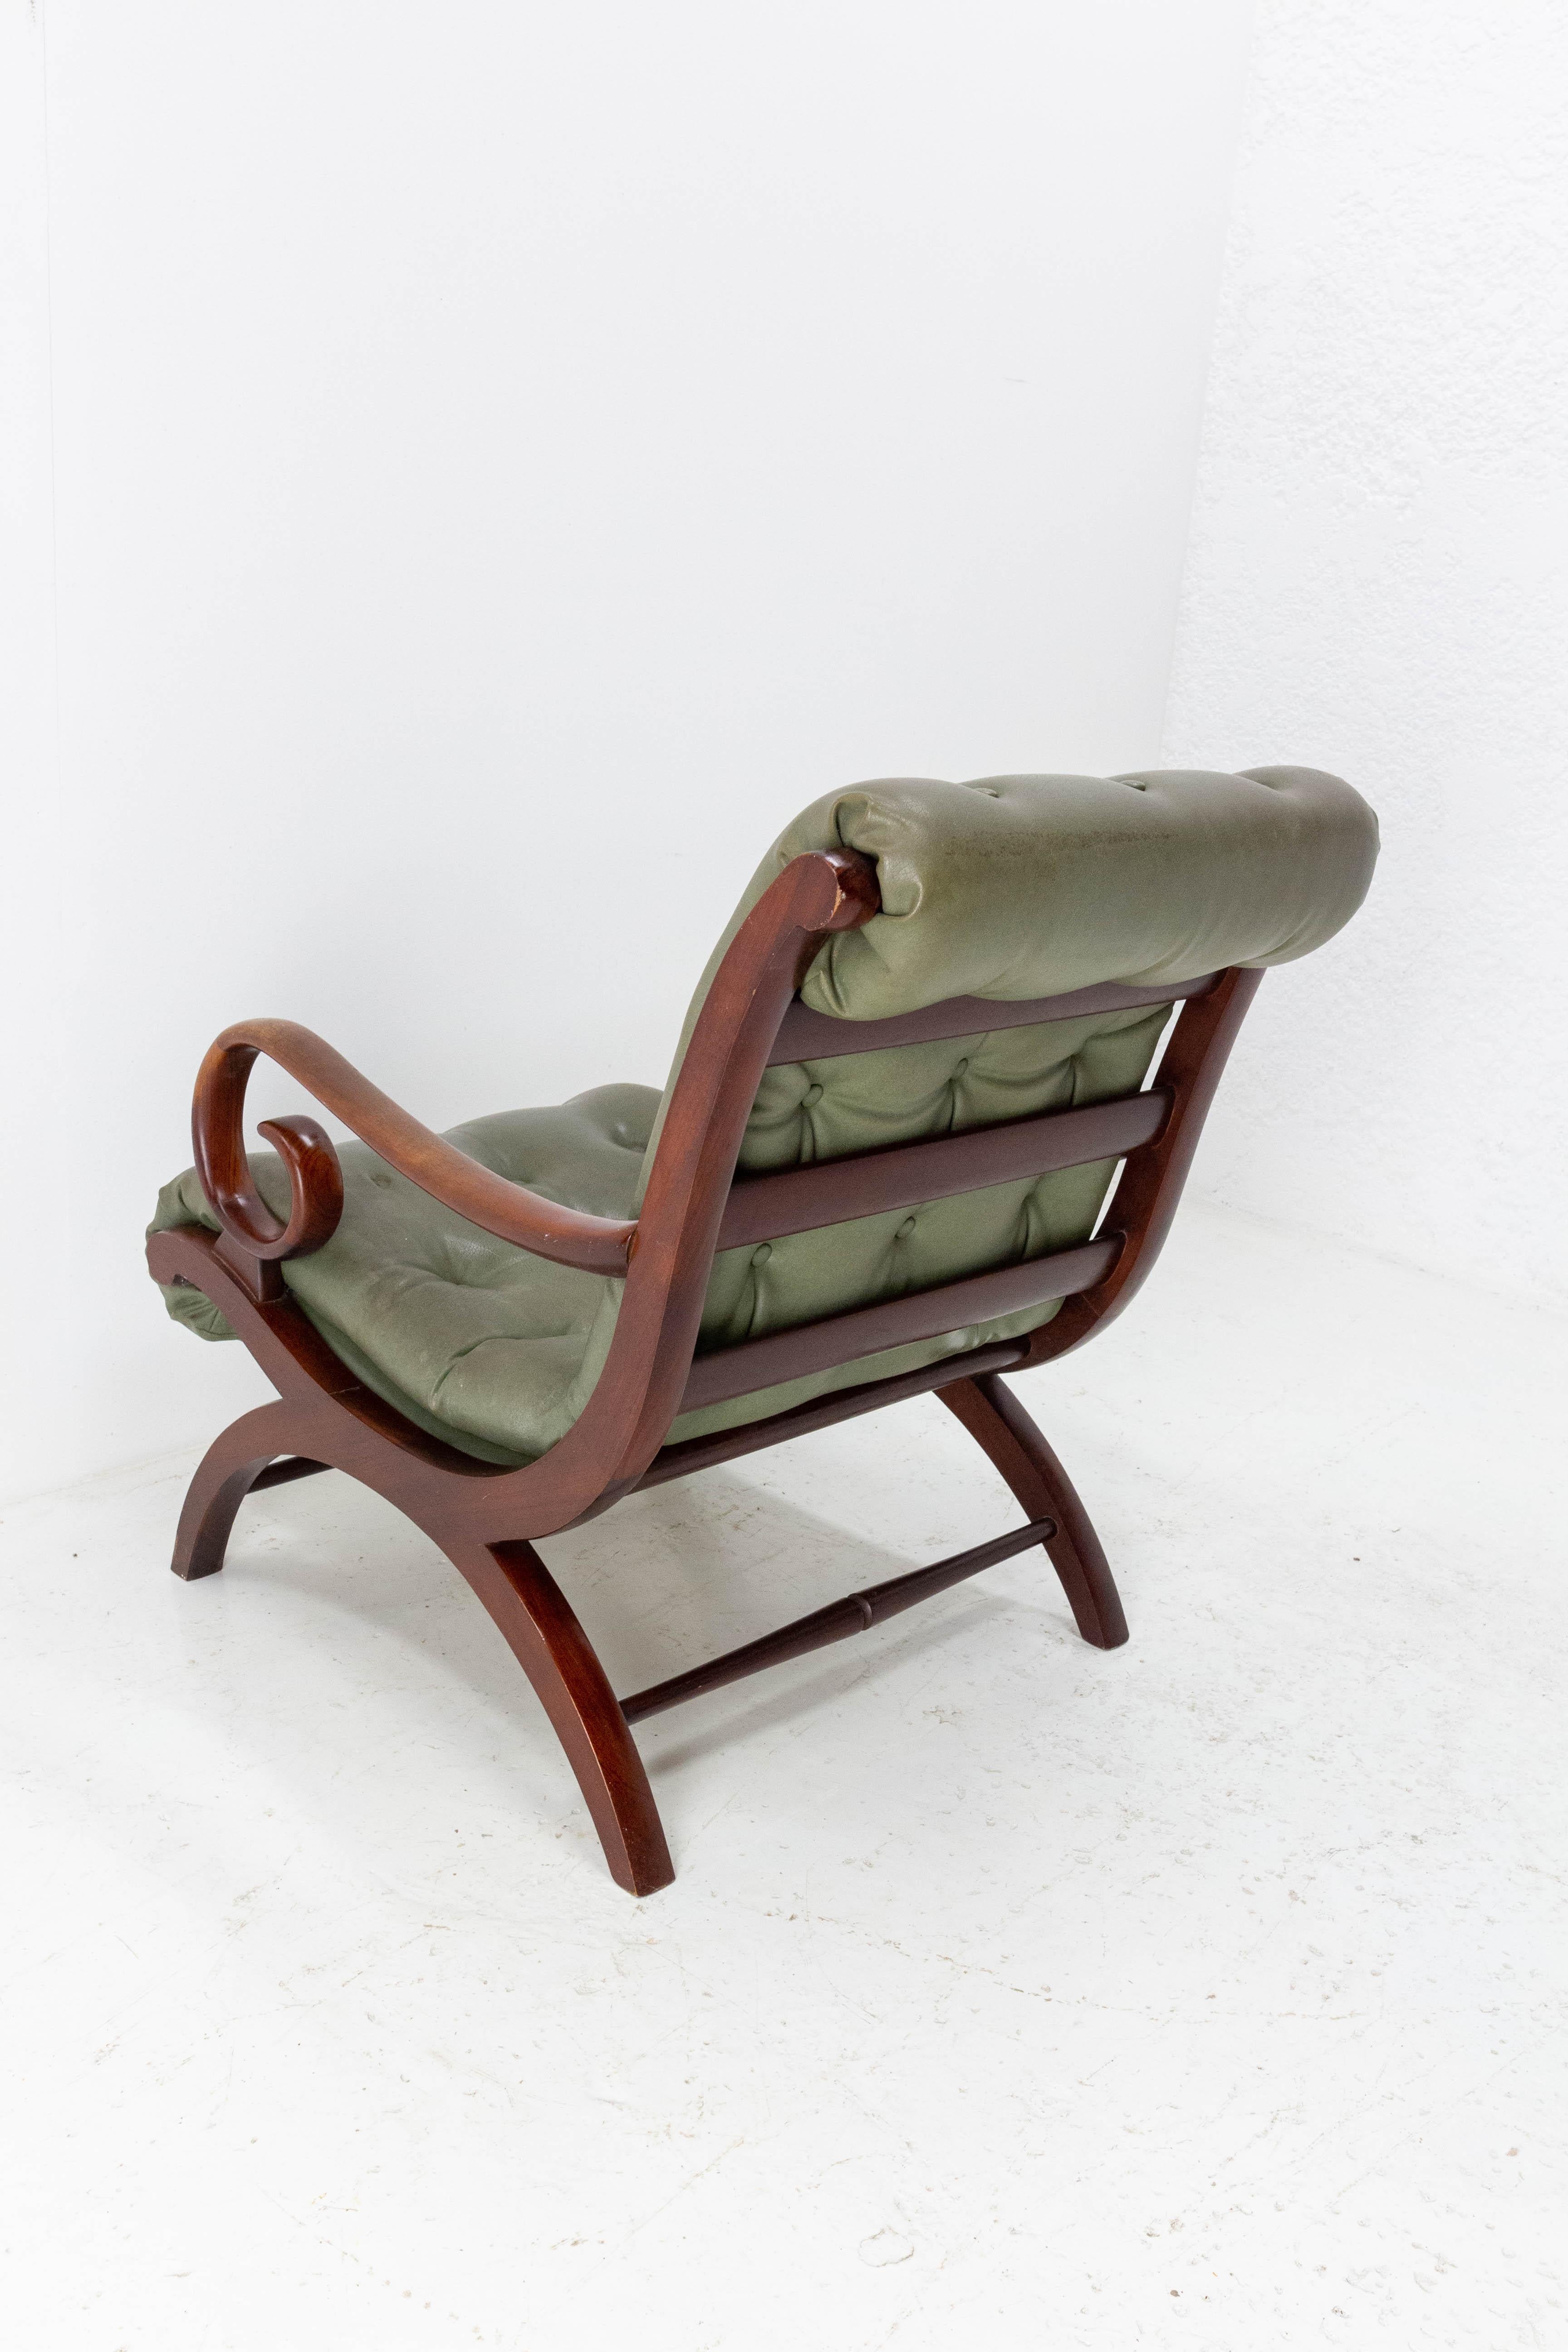 Wood Vintage Iroko Open Armchair with Deep Padded Skai Cushions, English 1960 For Sale